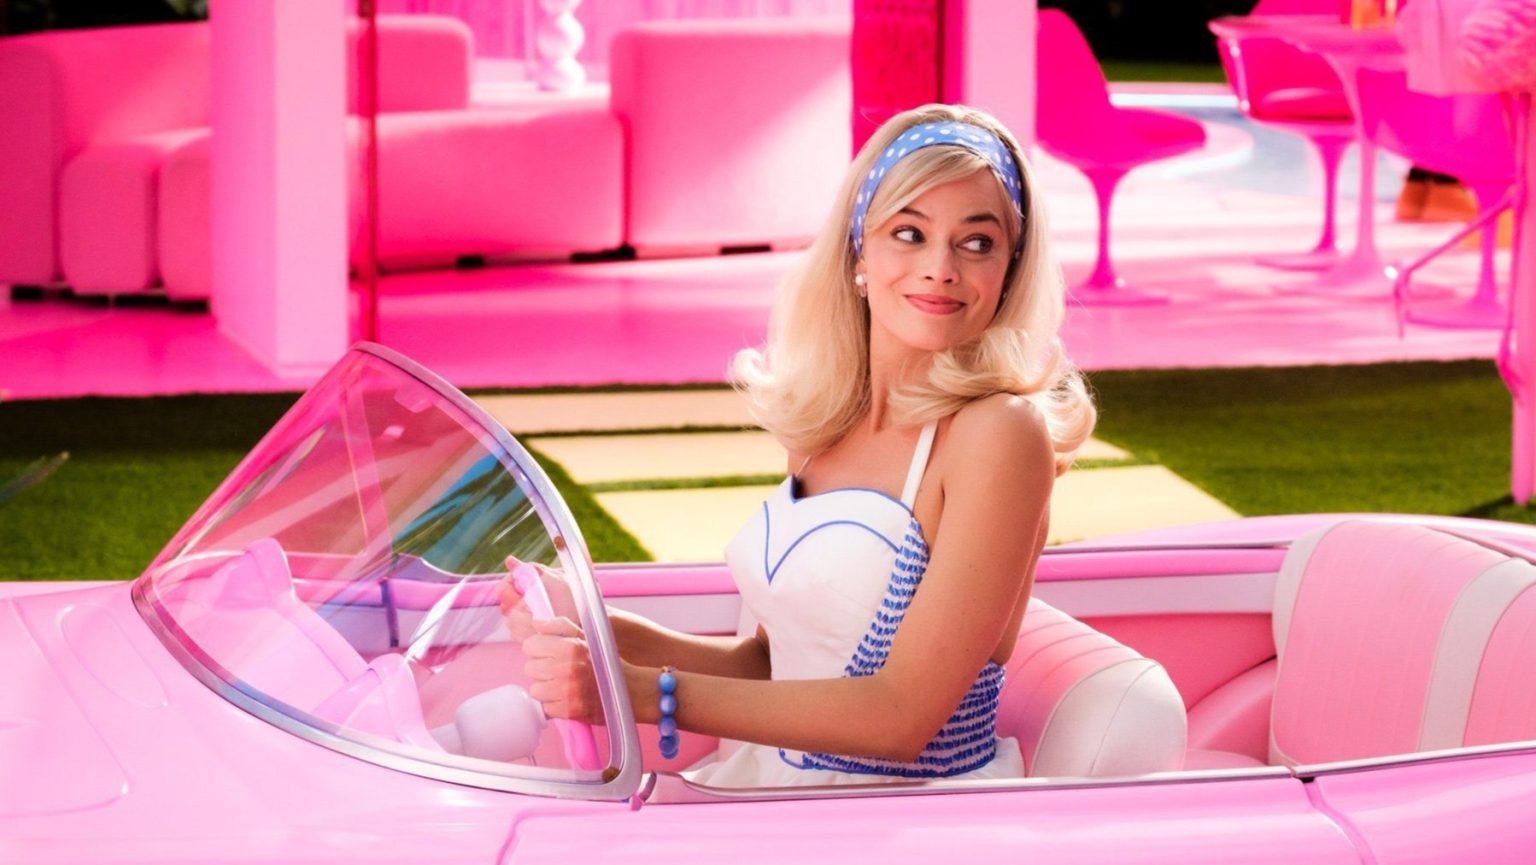 Margot Robbie stars as Barbie riding in her pink Corvette across the pink Barbie Land in the 2023 film.